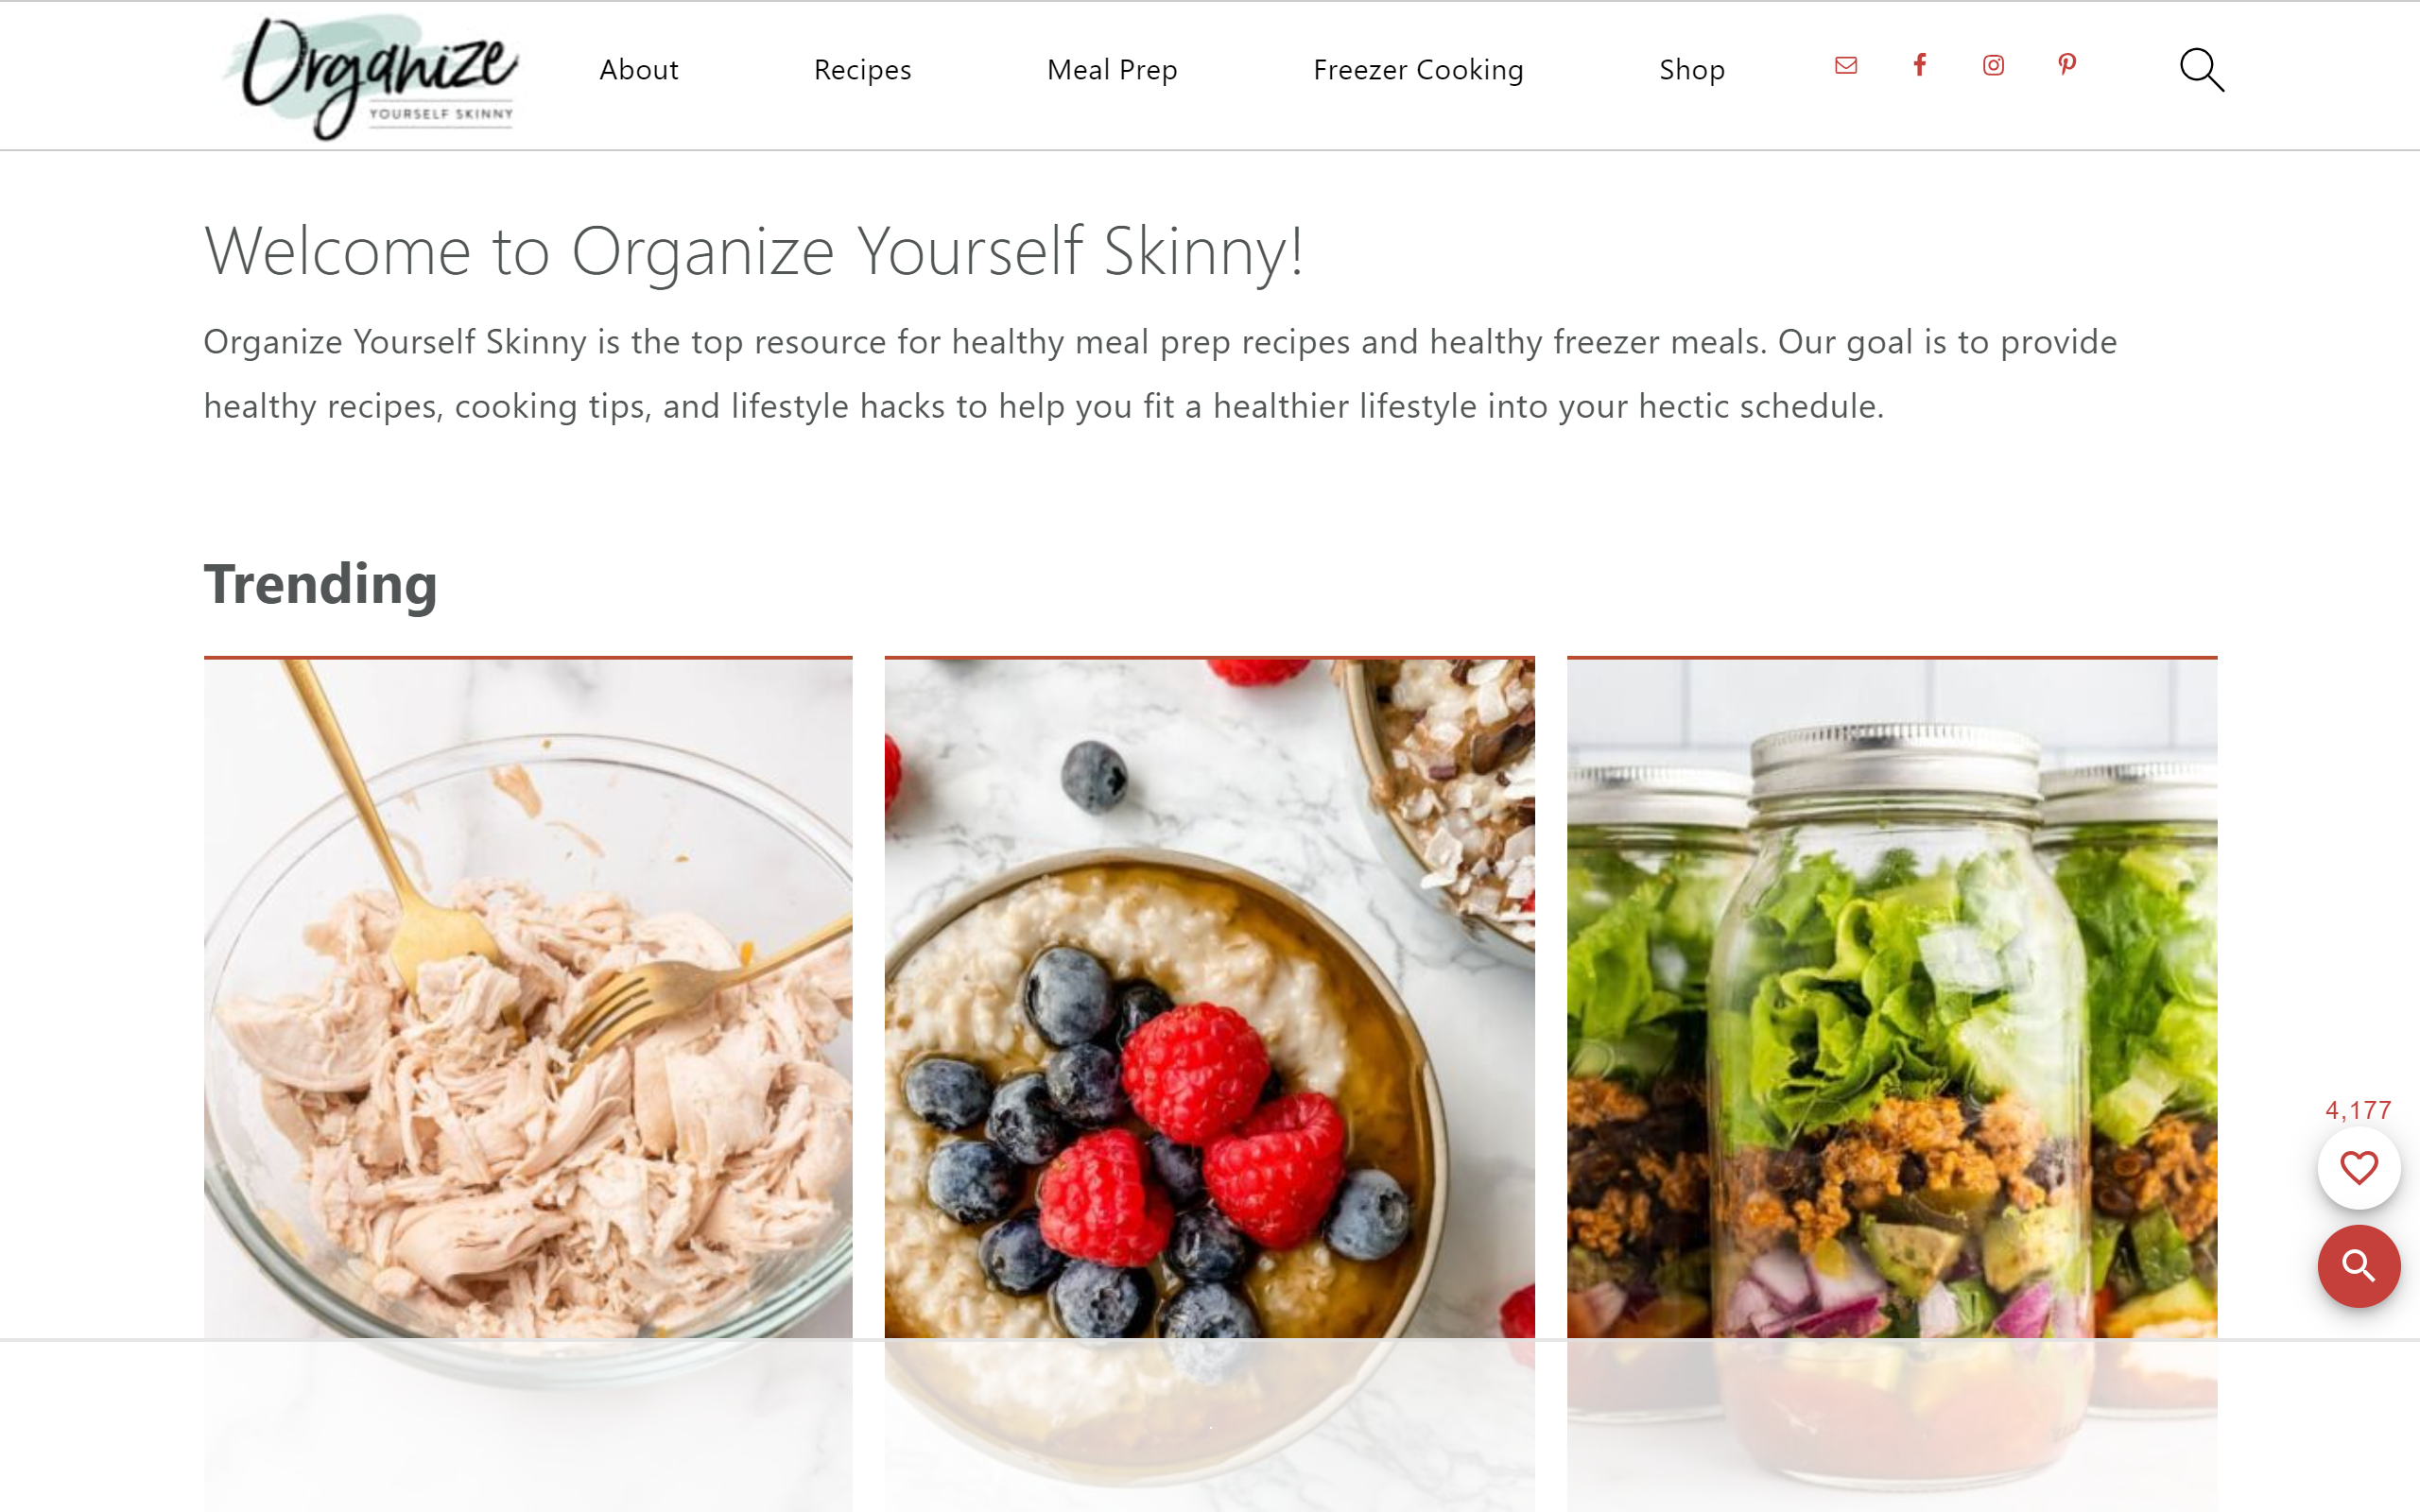  Organize Yourself Skinny weight loss blog 